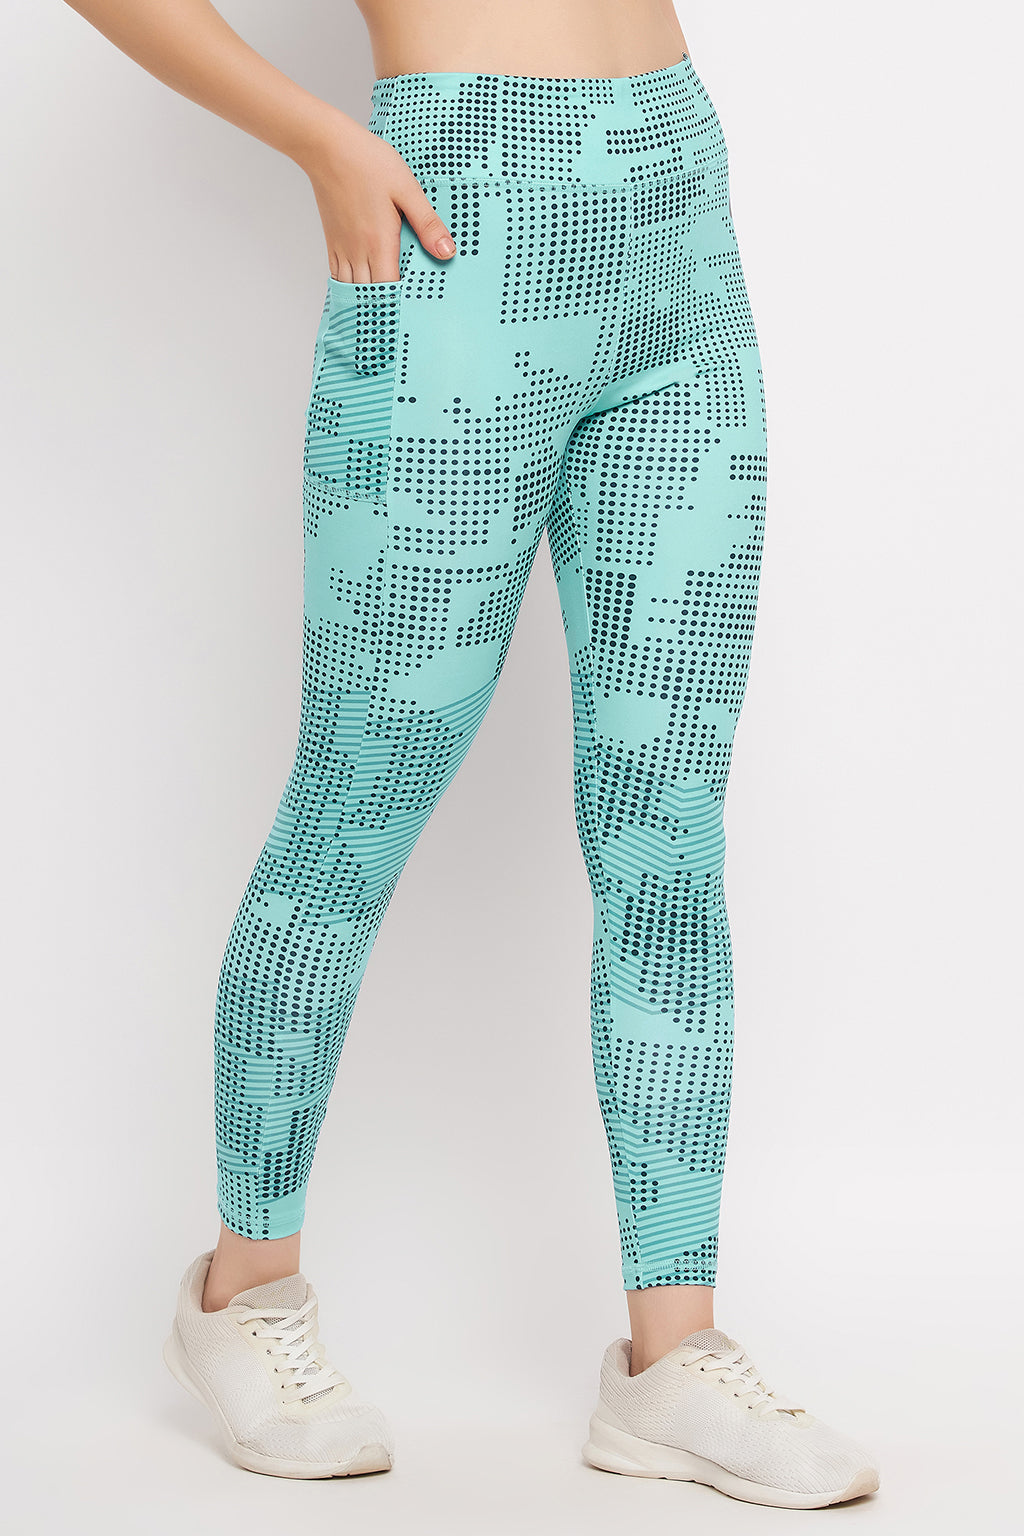 Sky Blue High-Rise Printed Active Tights with Side Pocket